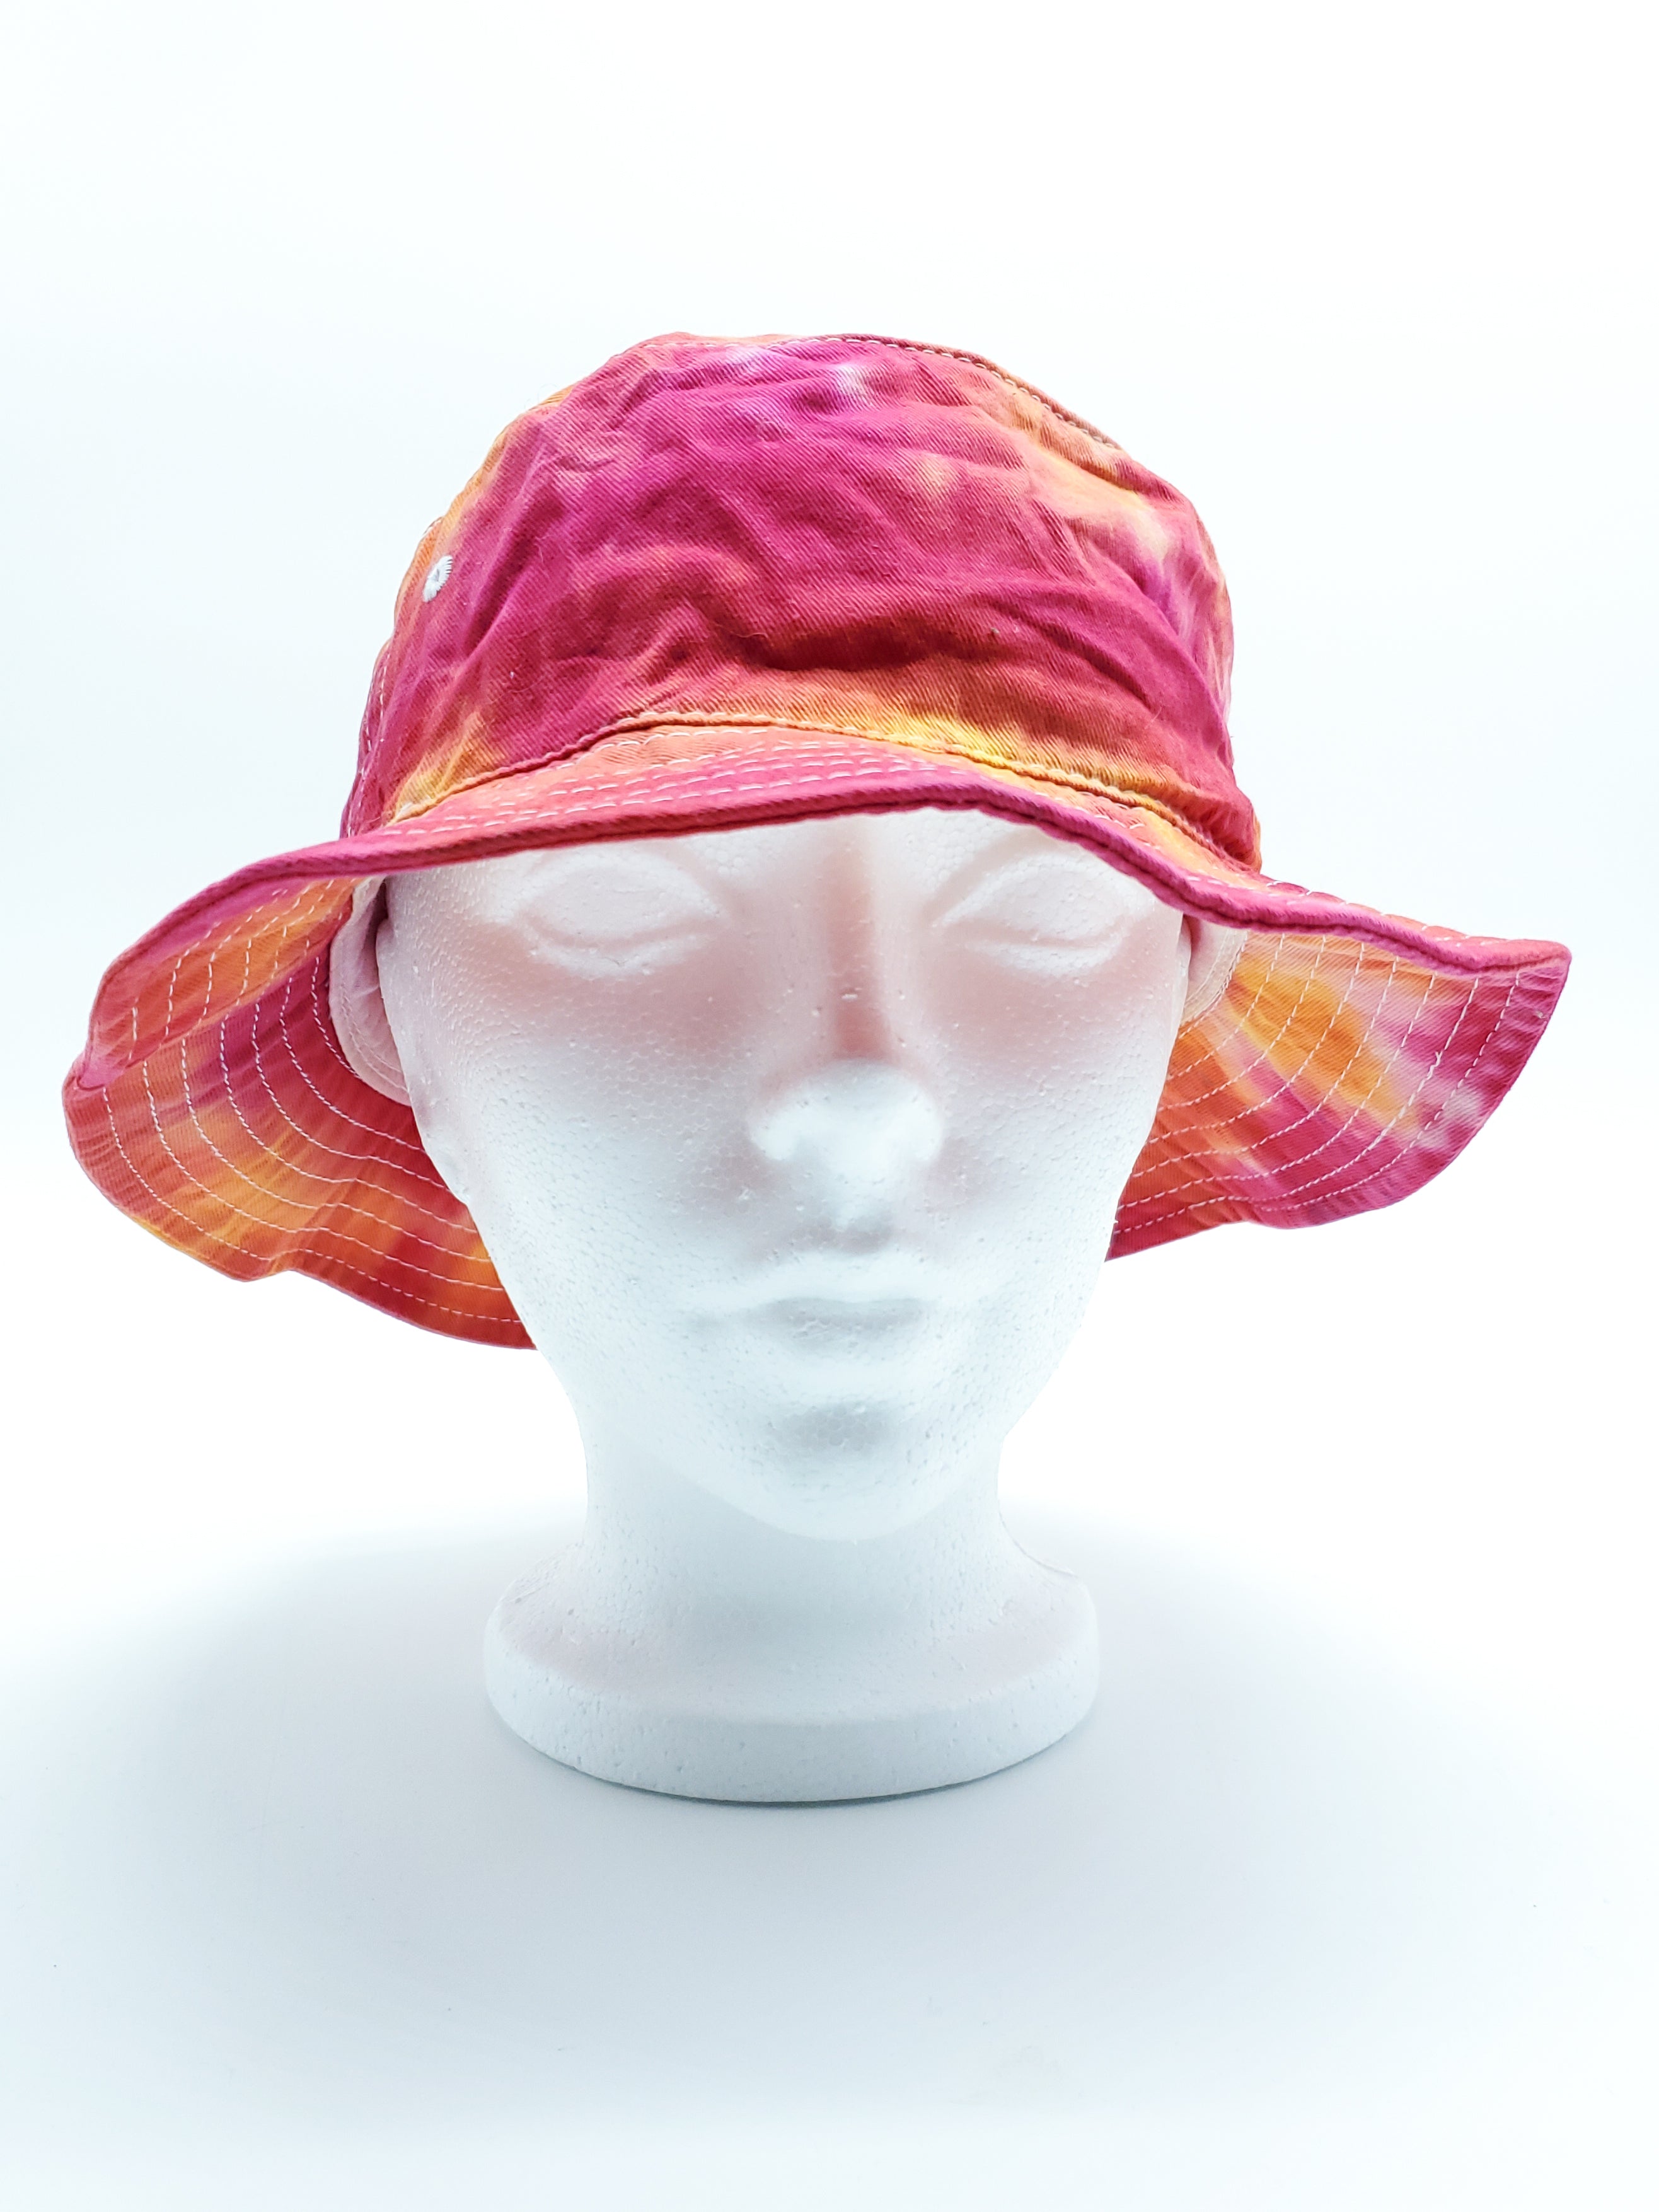 Gerbera Daisy Tie Dyed Bucket Hat (Adult, O/S) - The Caffeinated Raven